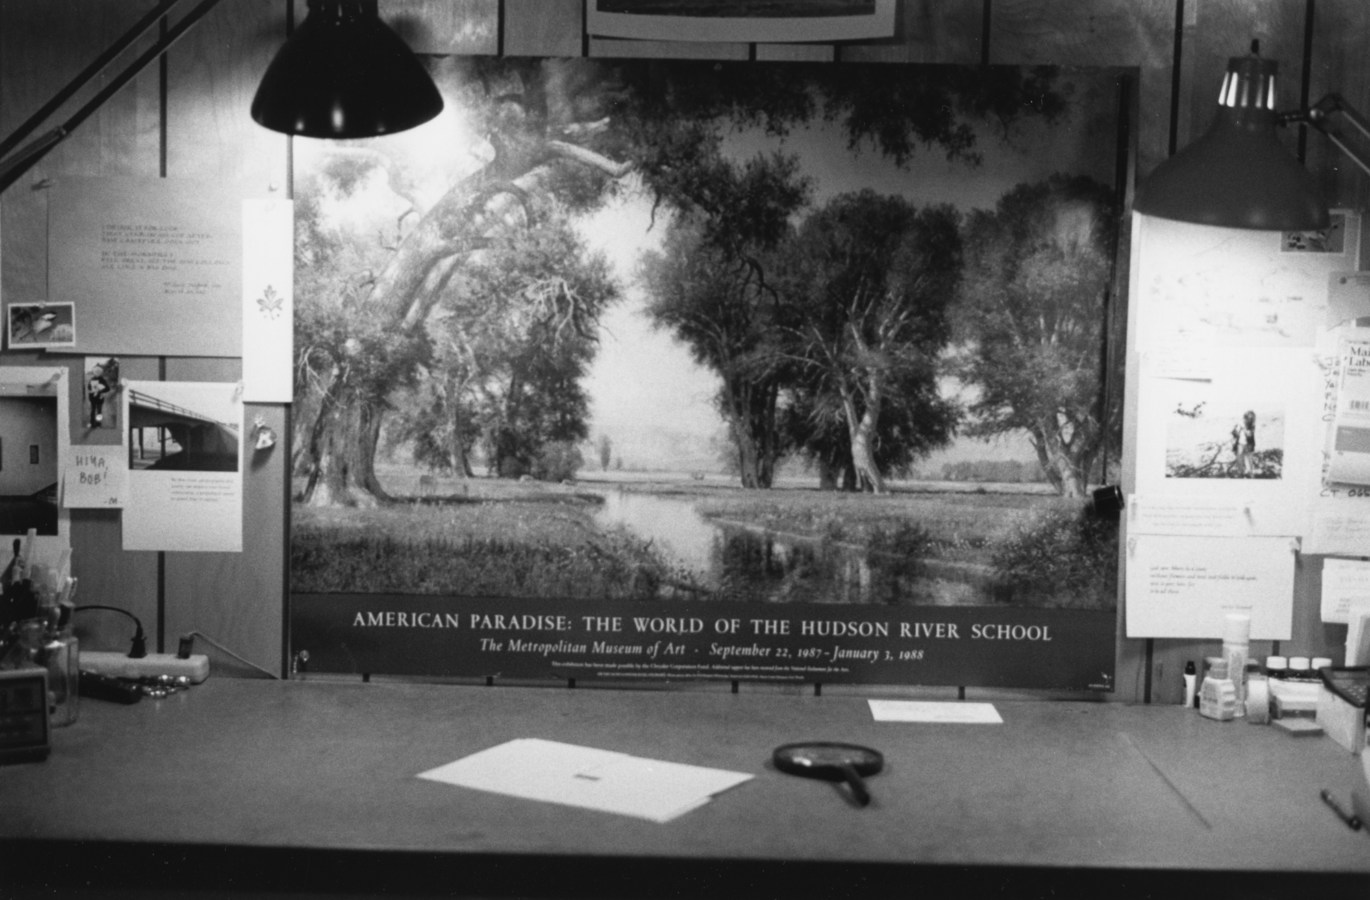 Black-and-white horizontal photograph of a desk with papers and a magnifying glass on the surface and a poster for the "Hudson River School" in the background